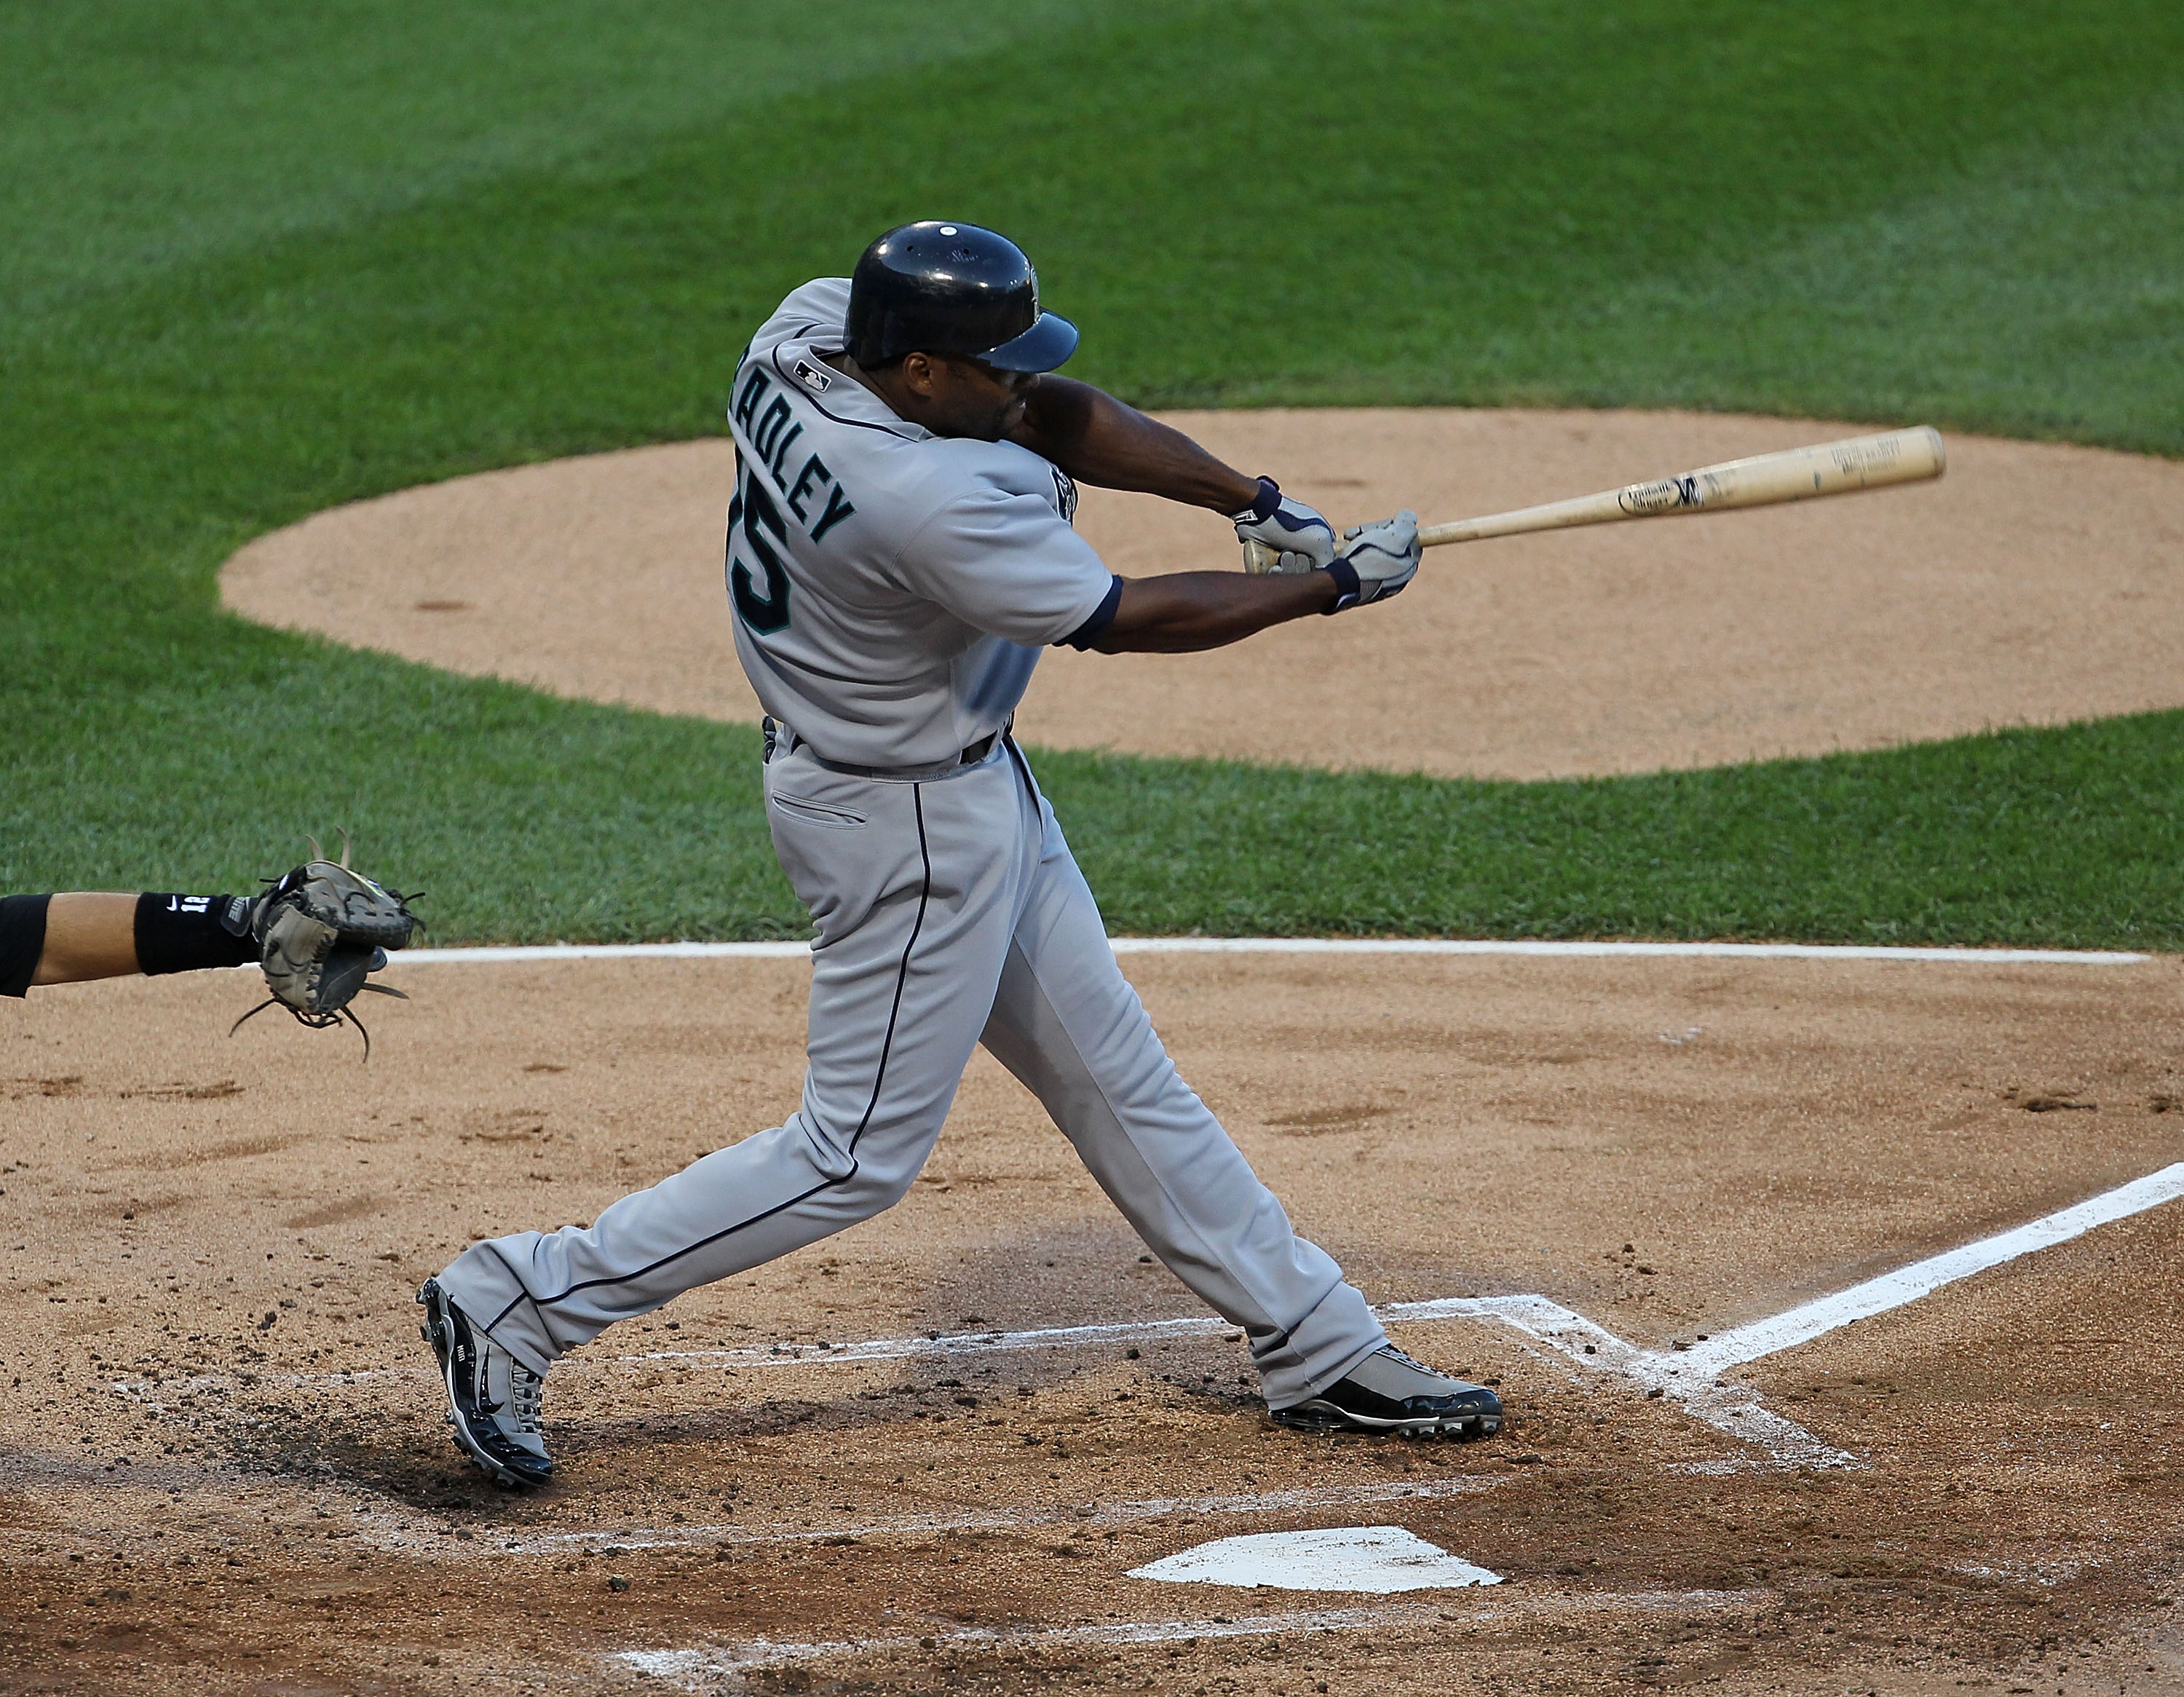 CHICAGO - JULY 26: Milton Bradley #15 of the Seattle Mariners takes a swing against the Chicago White Sox at U.S. Cellular Field on July 26, 2010 in Chicago, Illinois. The White Sox defeated the Mariners 6-1. (Photo by Jonathan Daniel/Getty Images)